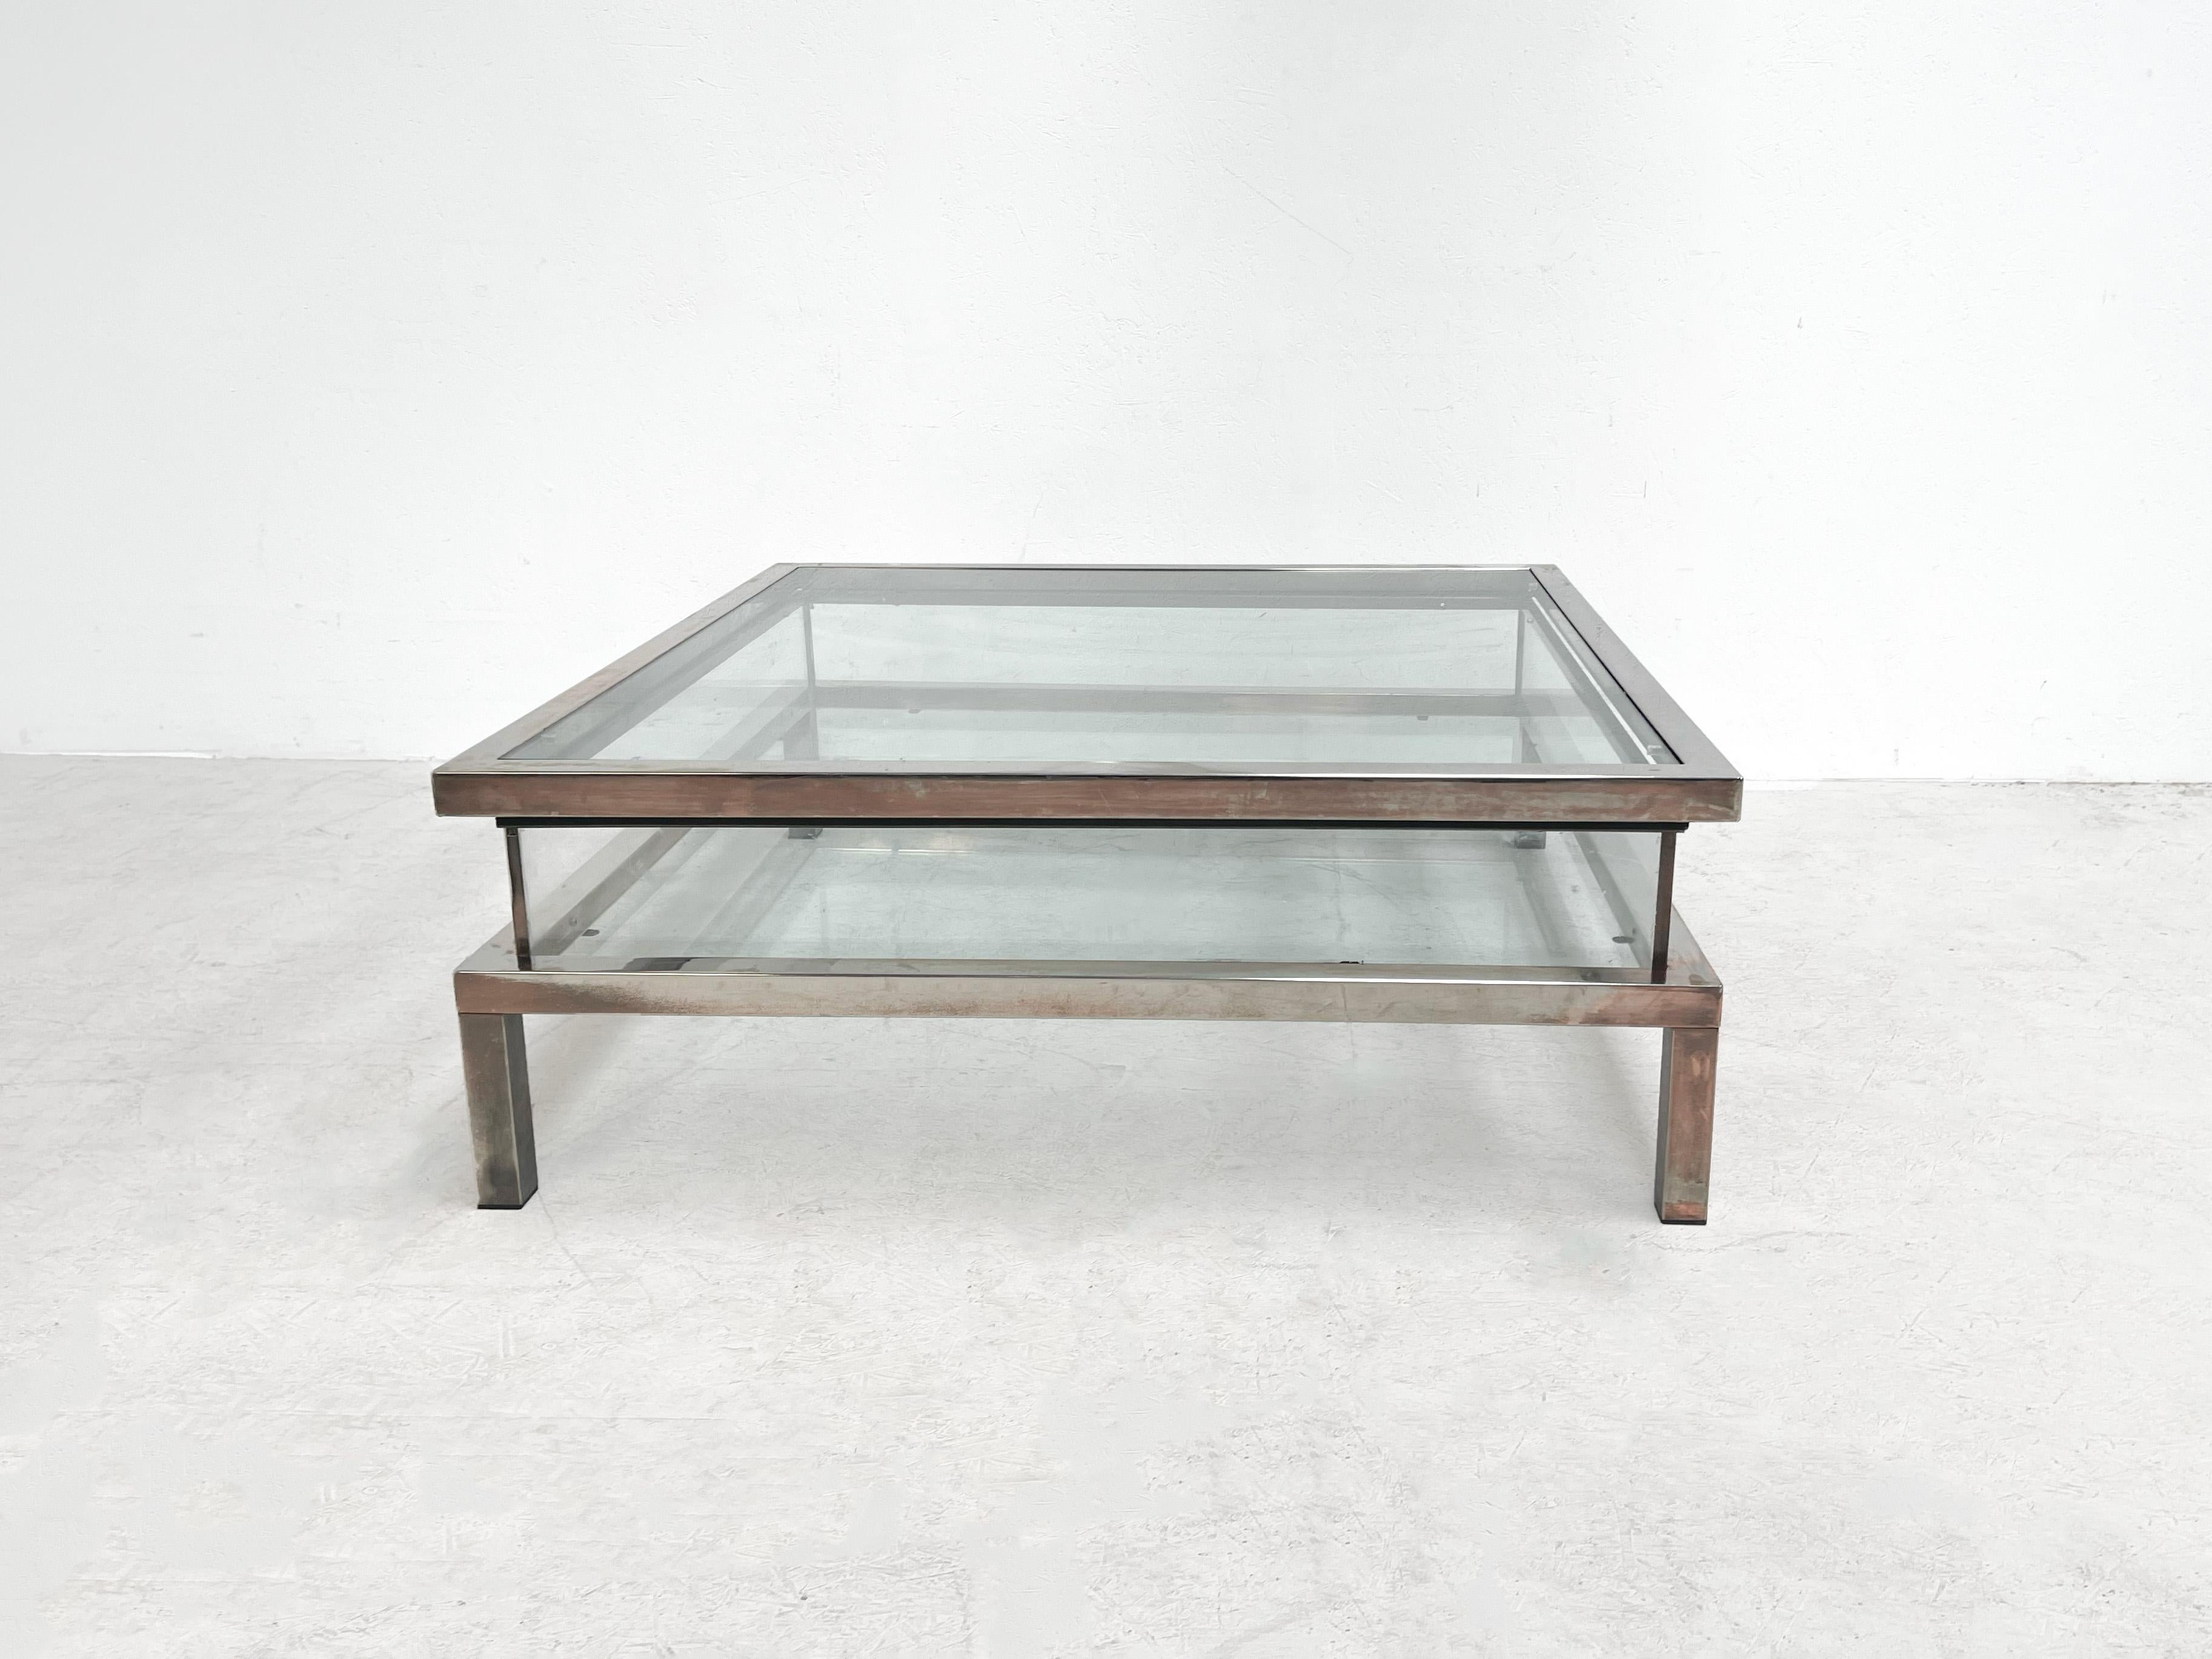 Beautiful sliding coffee table in a Maison Jansen style. The sliding table is perfect to display books, magazines or other fun knick knacks.

 

The table is in ok condtion with signs of age. It has oxidation on the frame and some scratches. The